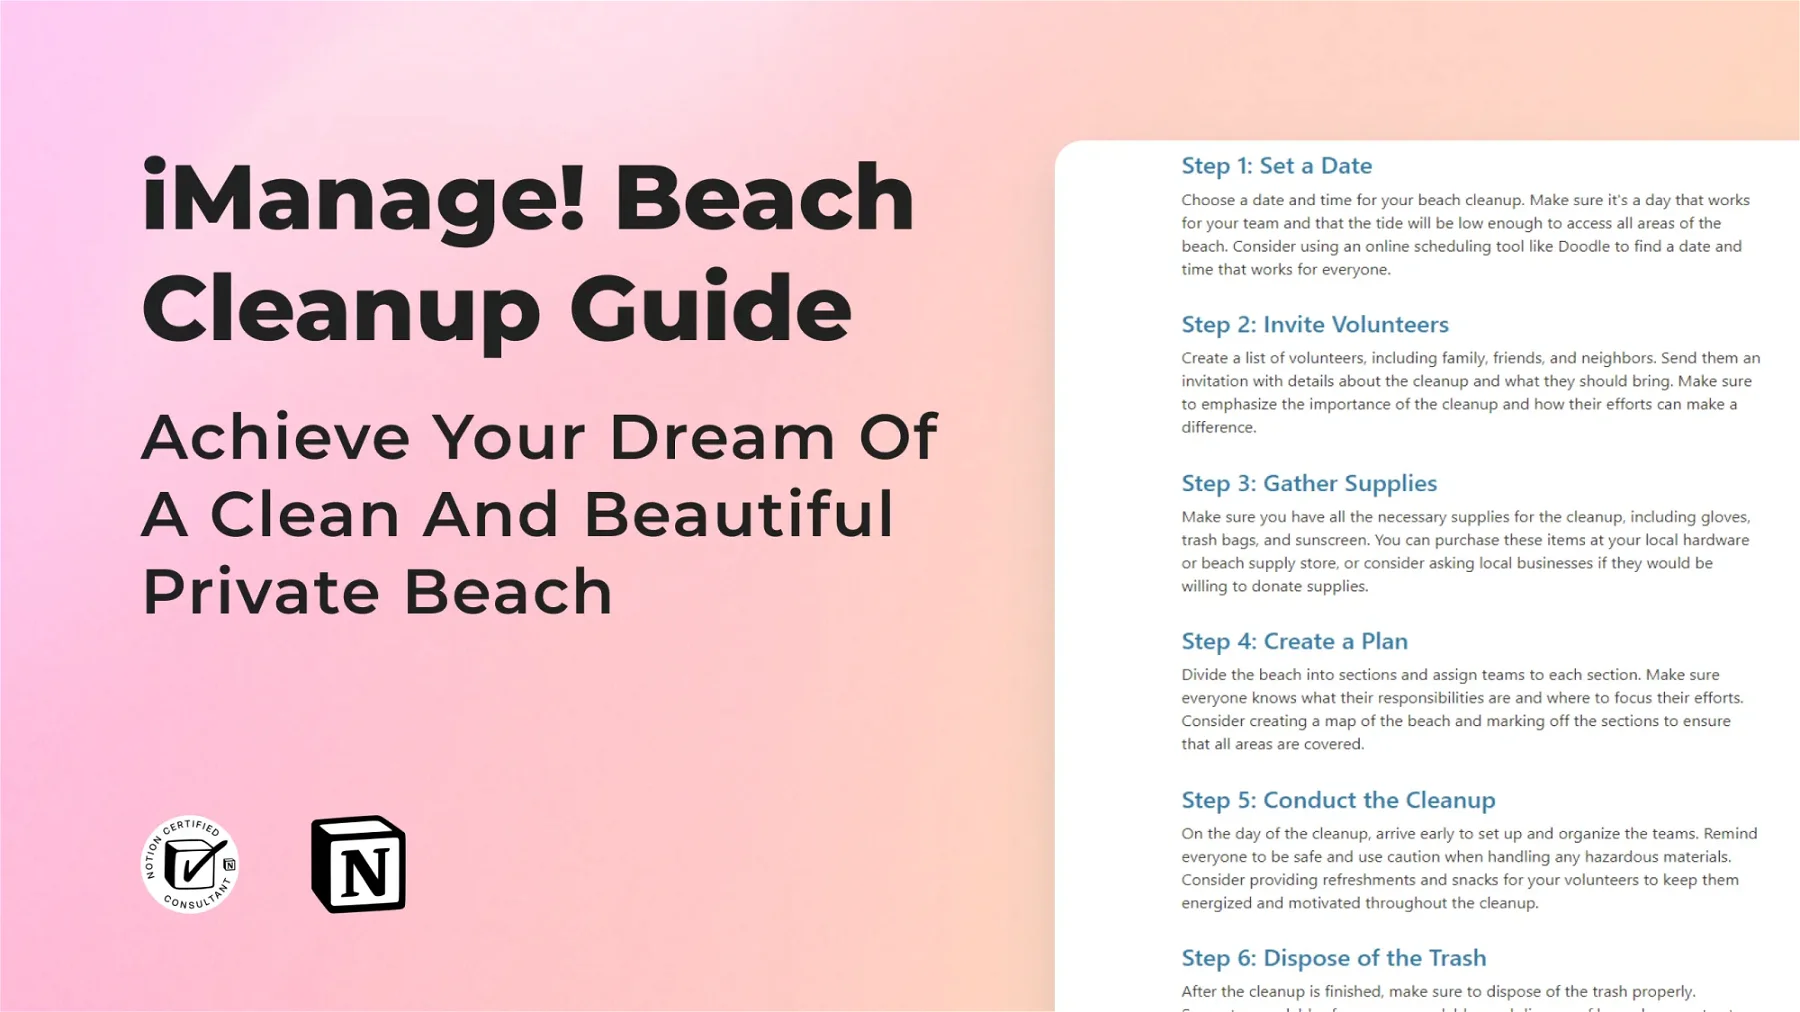 iManage! Beach Cleanup Guide